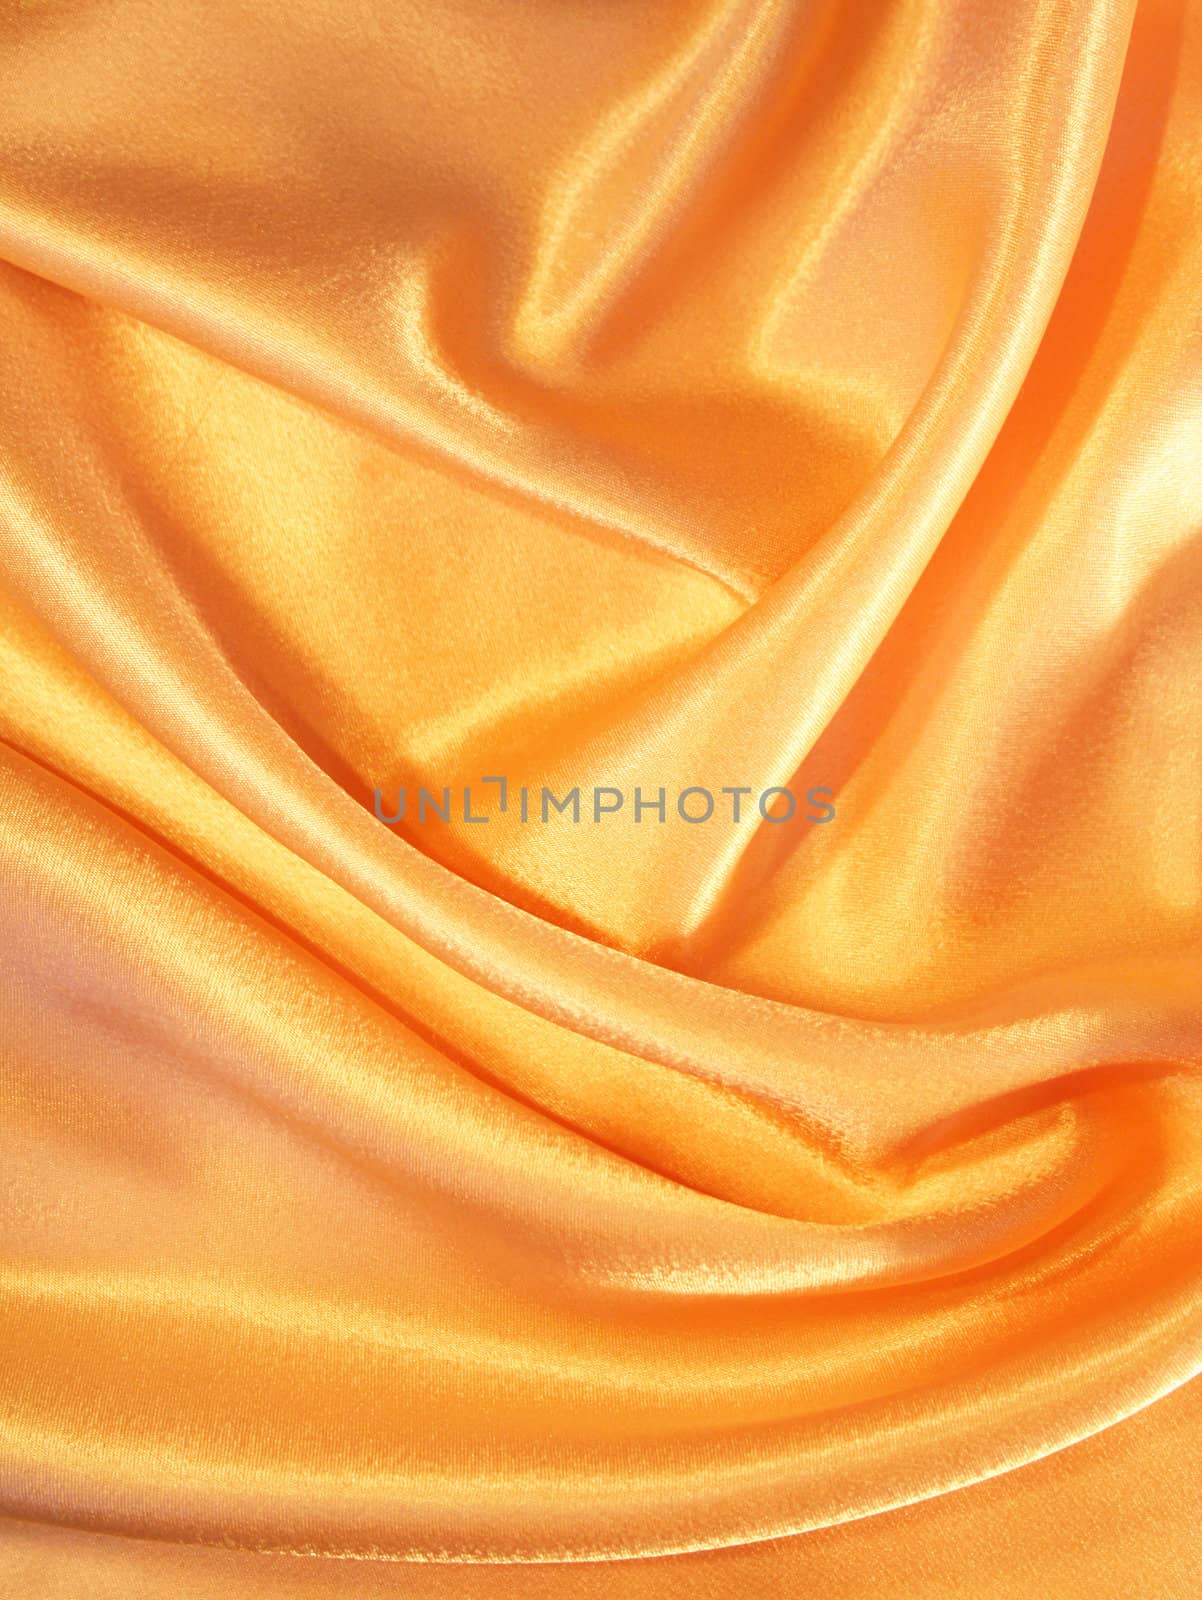 Smooth elegant golden satin can use as background